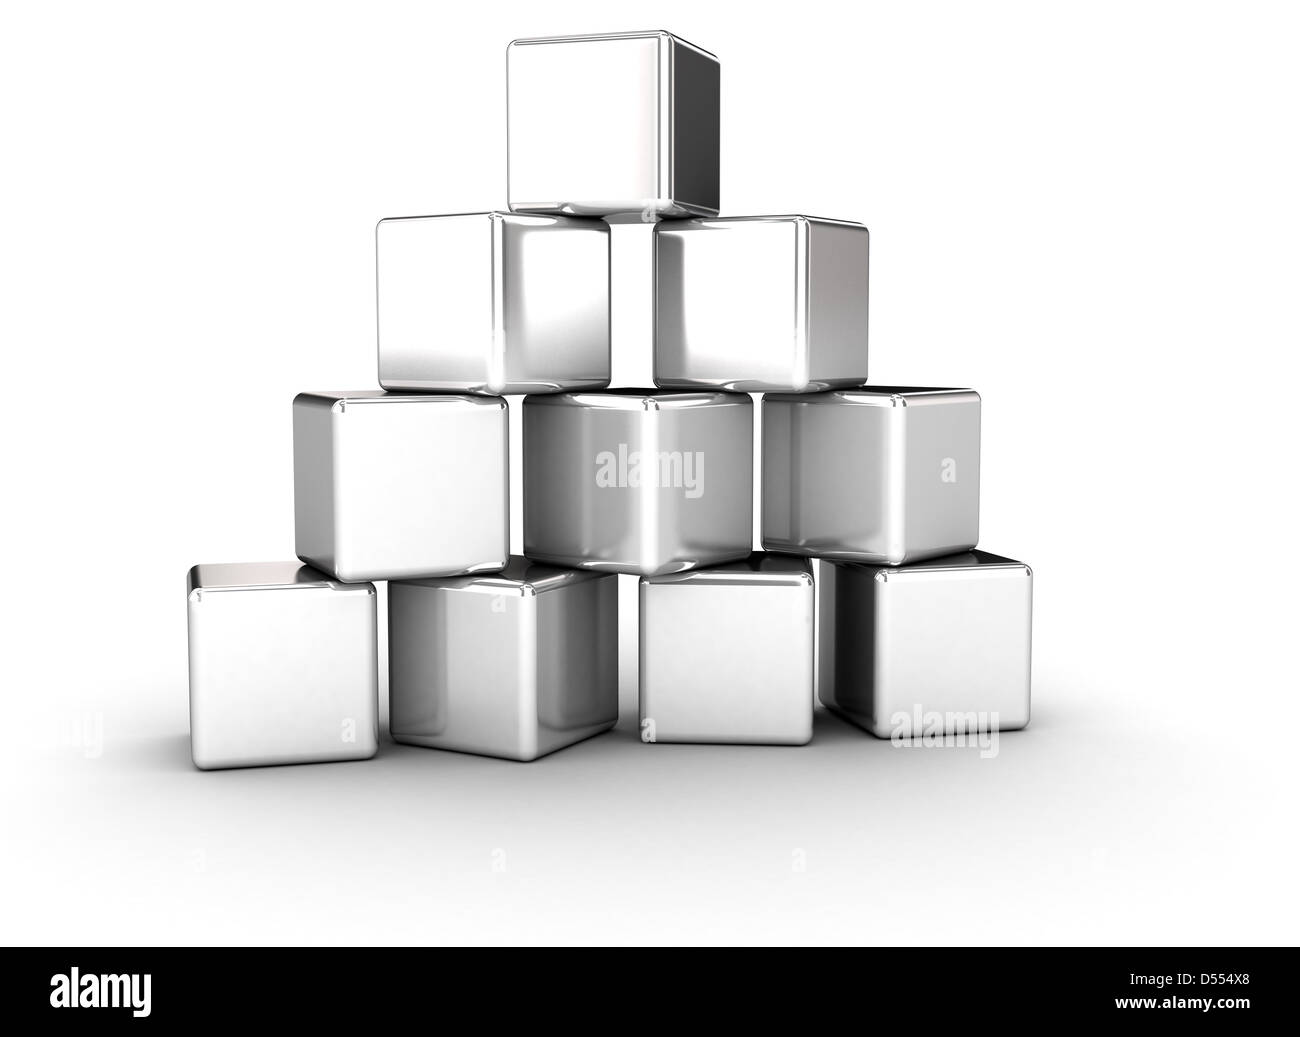 Chrome metal 3d cubes in the shape of a pyramid Stock Photo